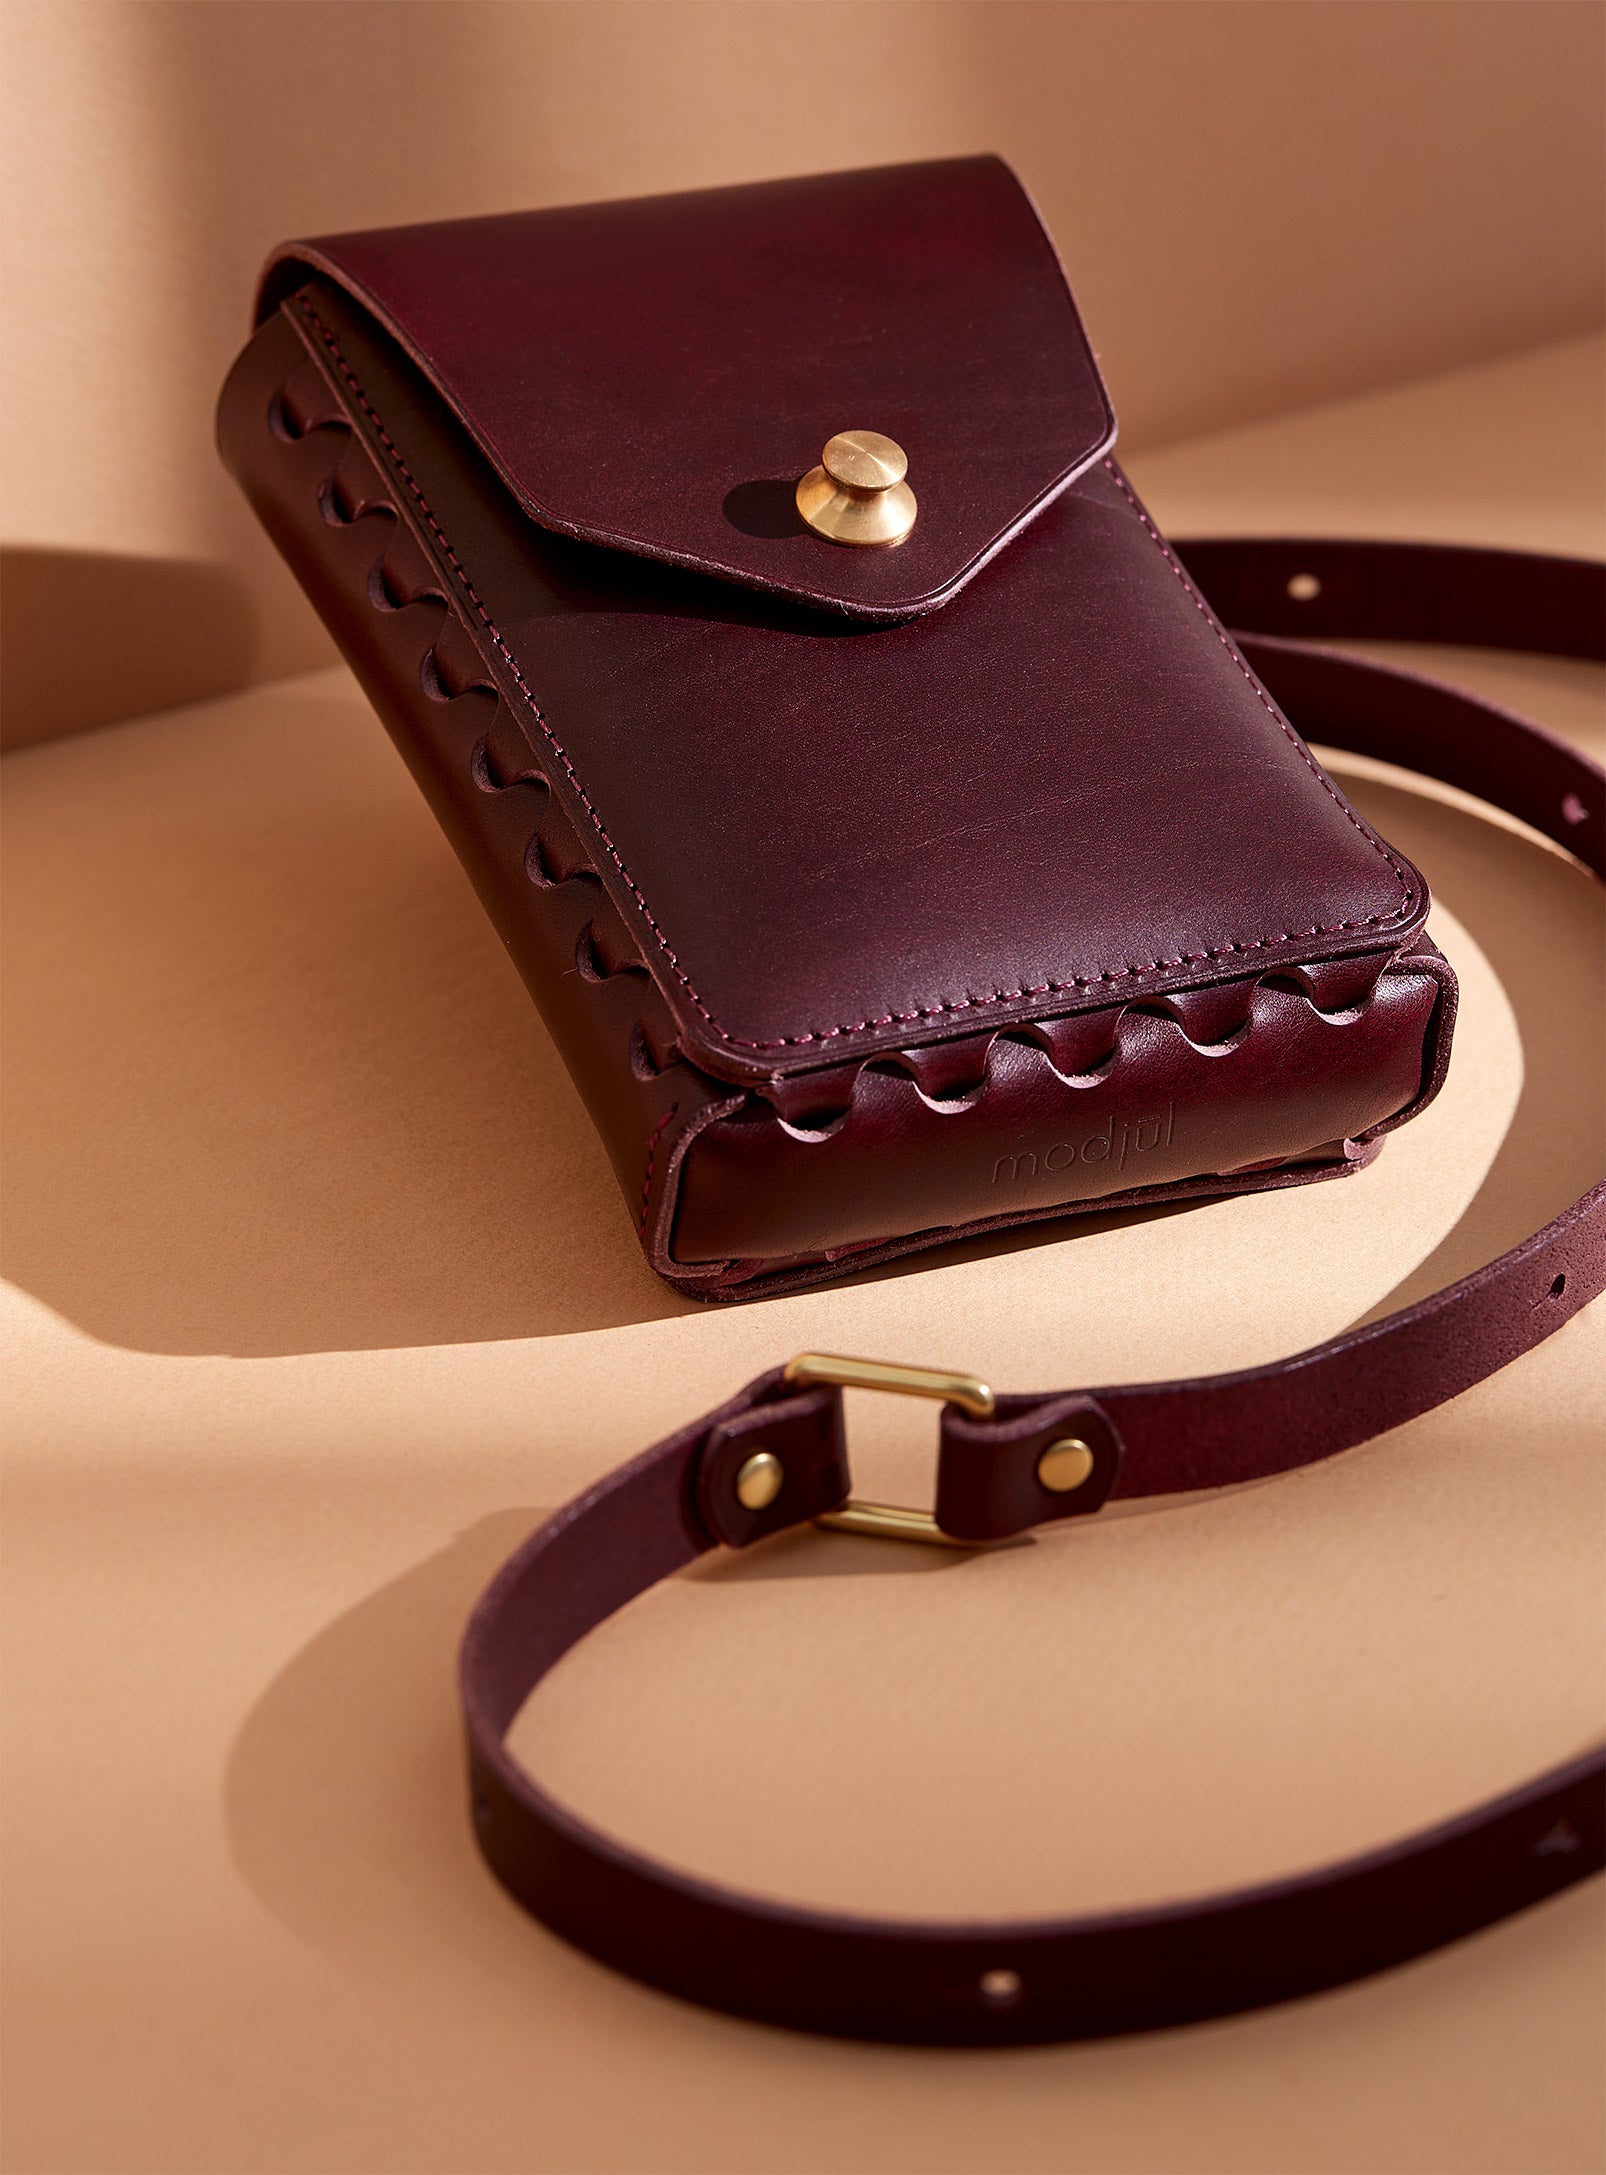 modjūl's capsule leather bag in burgundy. A rectangular-shaped bag with long straps, perfect for a phone.